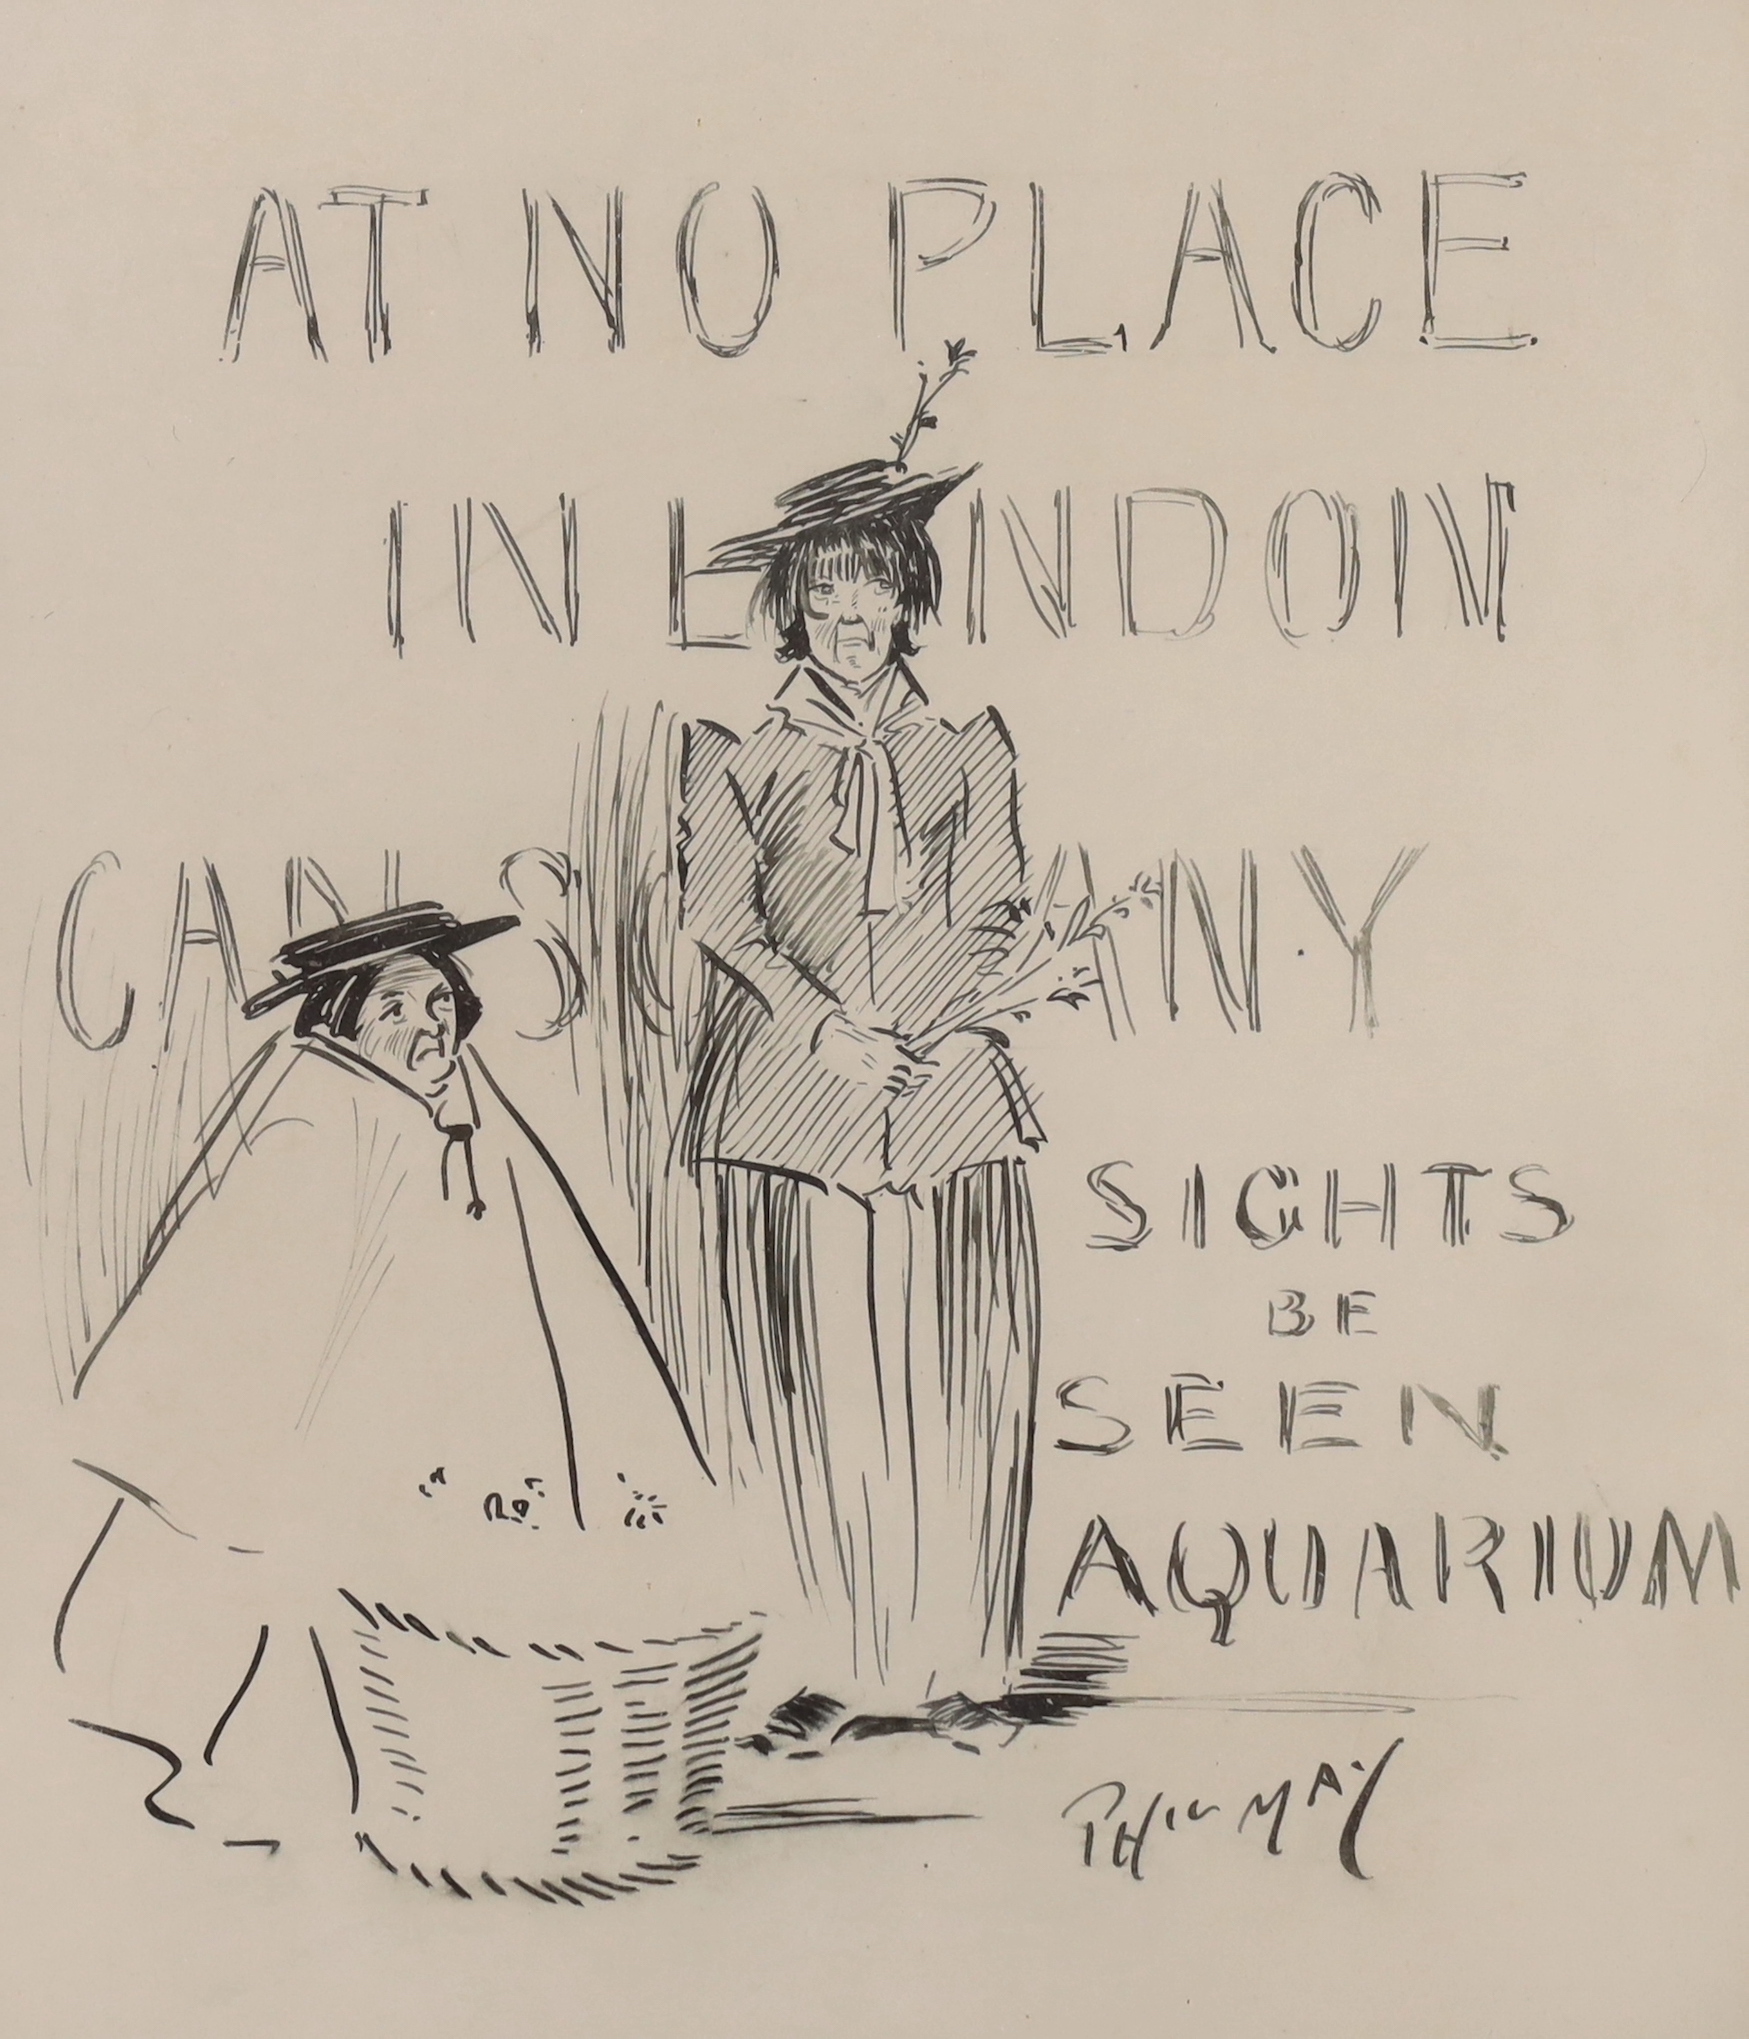 Phil May R.I. (British, 1864-1903), pen and ink, 'At no place in London can so many sites be seen, Aquarium', signed, 25 x 21cm